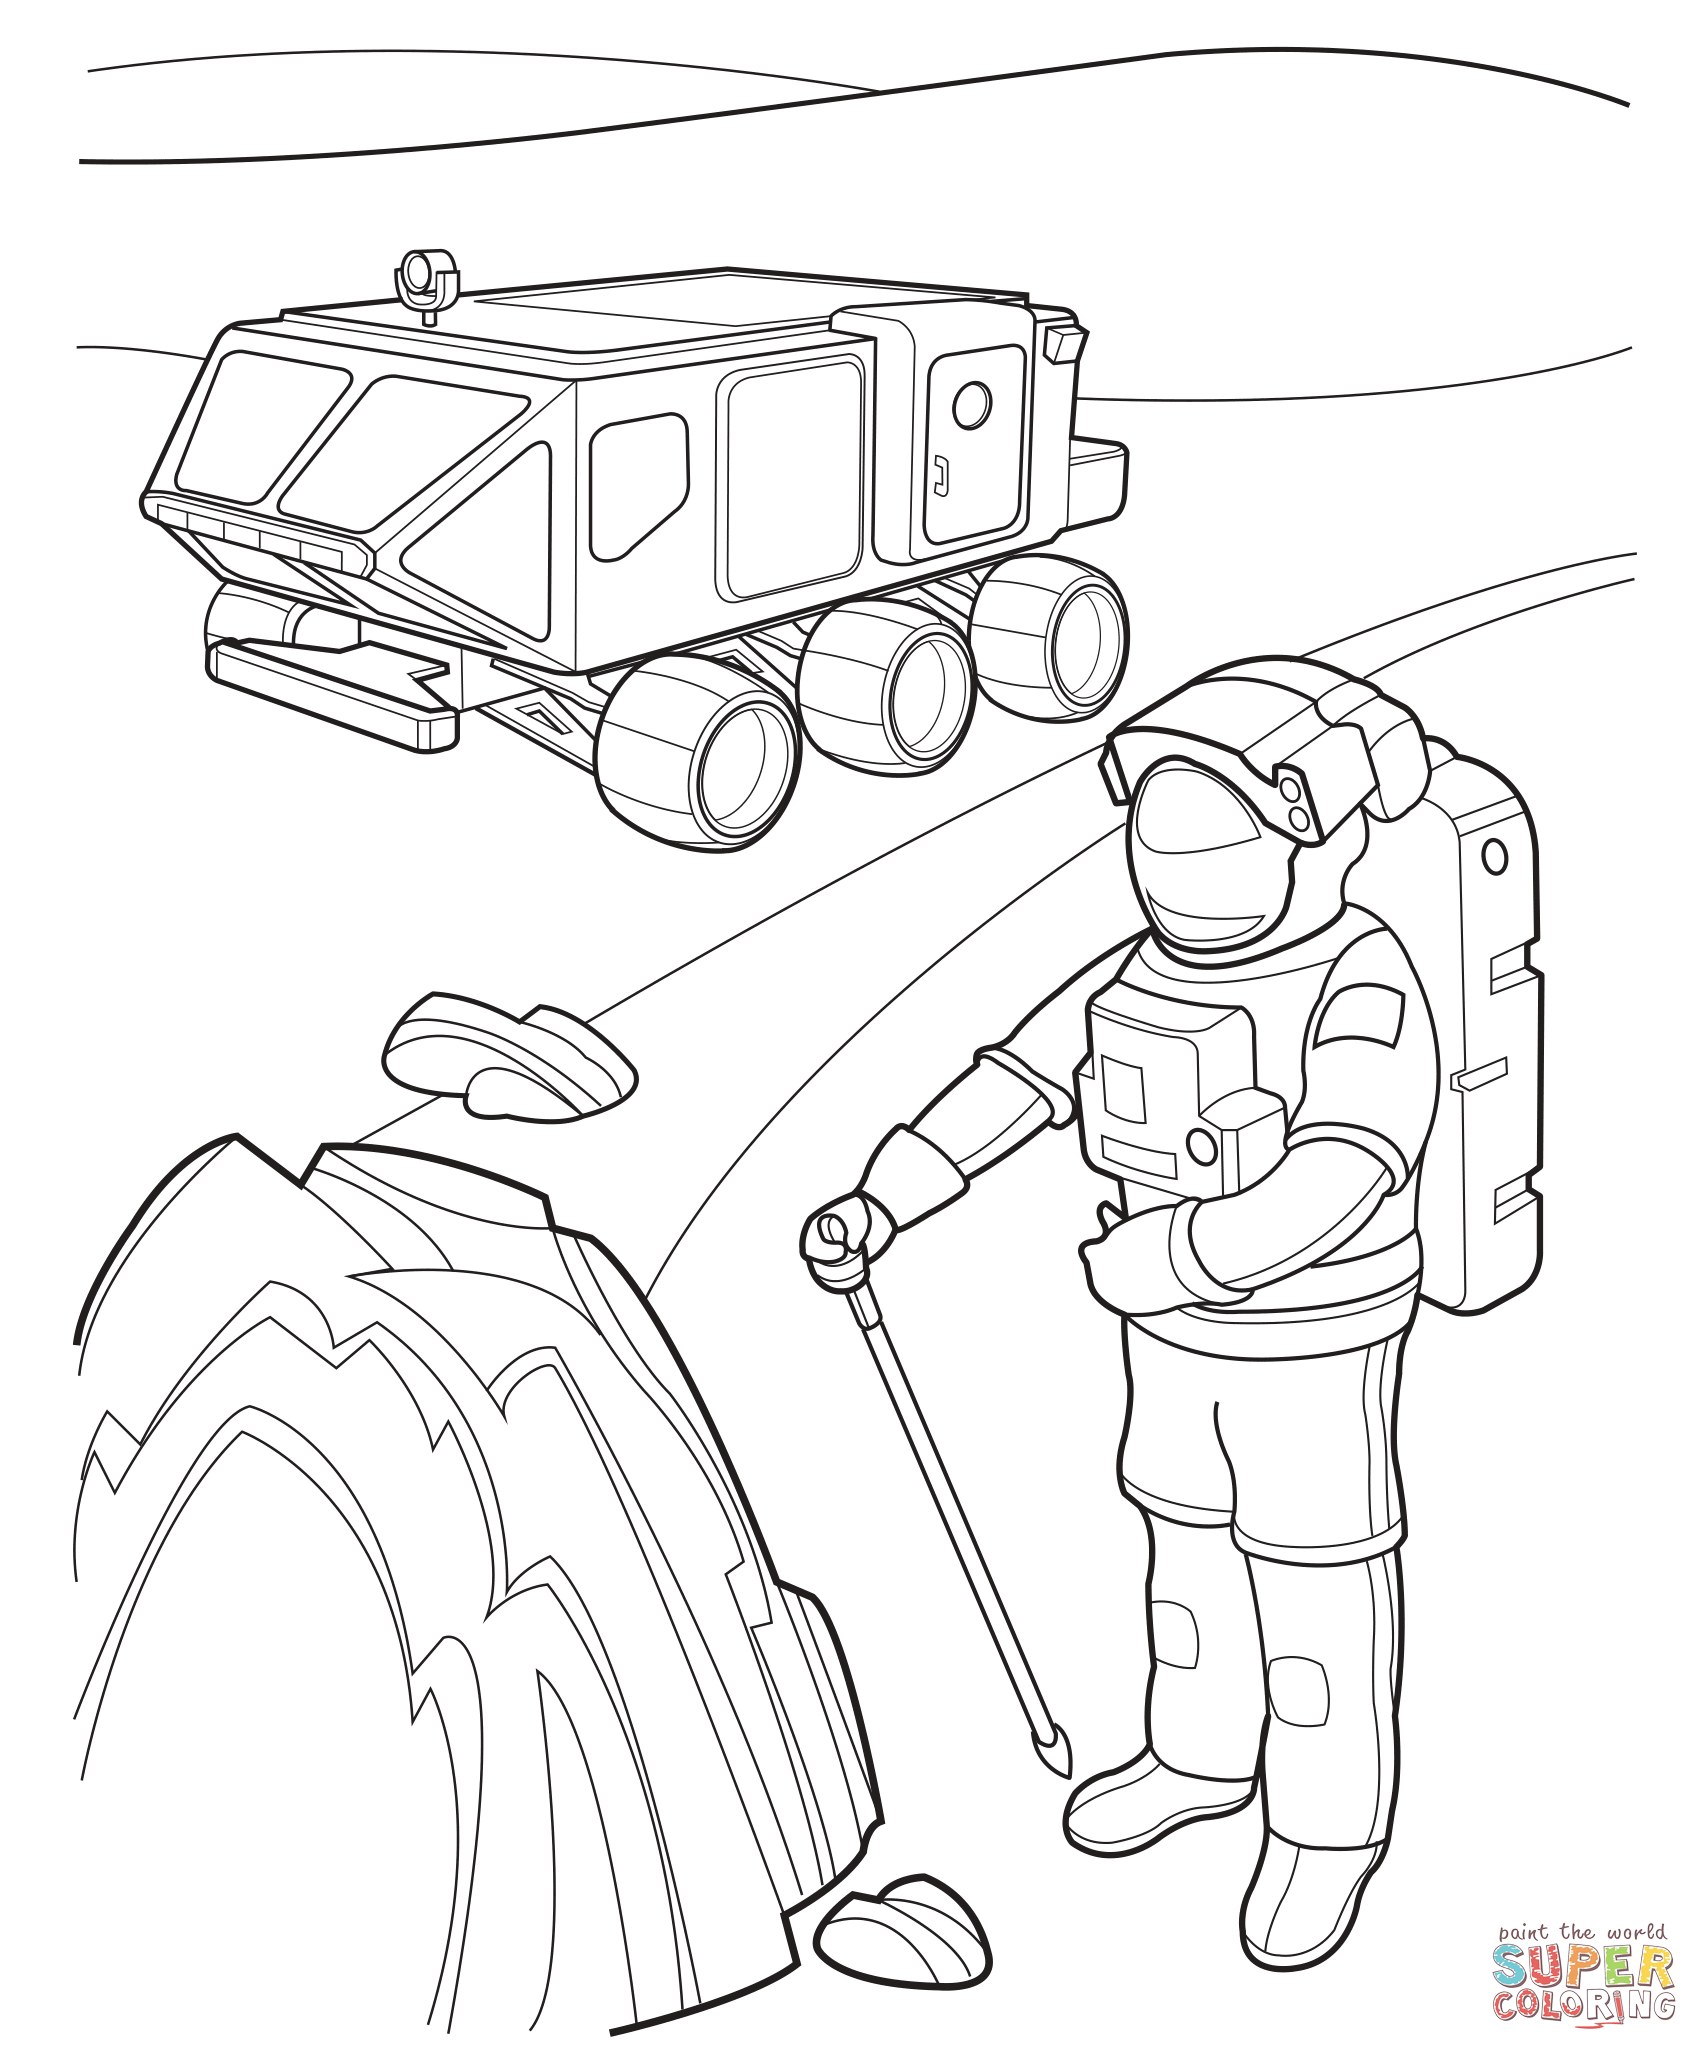 Proposed Lunar Rover coloring page | Free Printable Coloring Pages